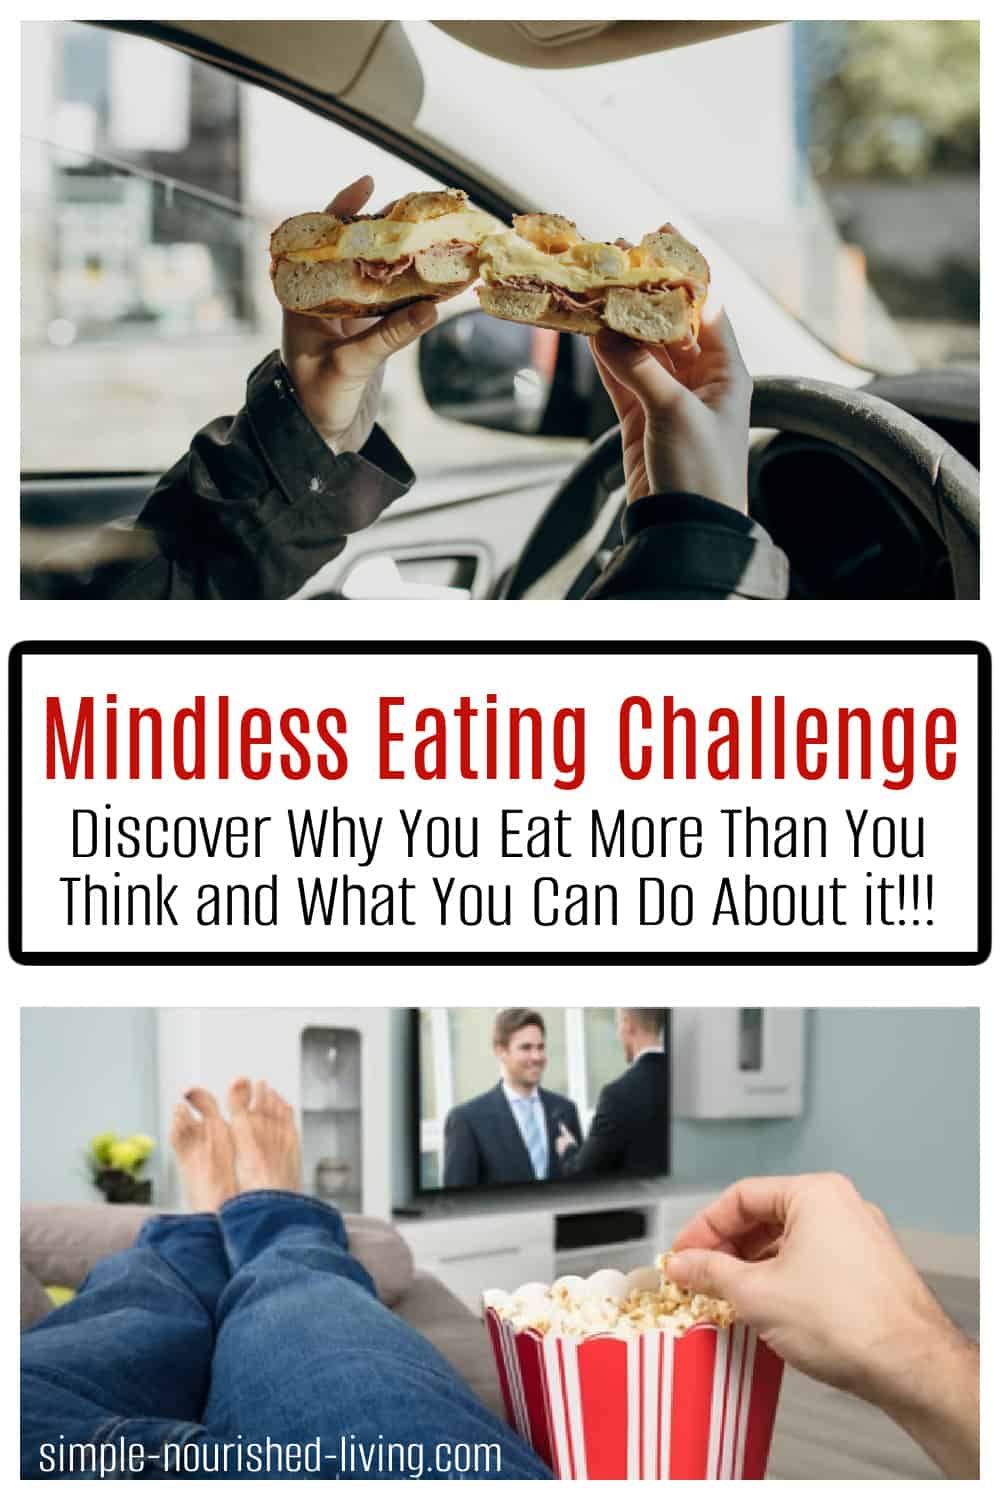 3 frames: top photo driving while eating a breakfast bagel sandwich, bottom photo person lying on sofa watching television eating popcorn with Text in between: Mindless Eating Challenge: Discover Why You Eat More Than You Think & What You Can do About it.